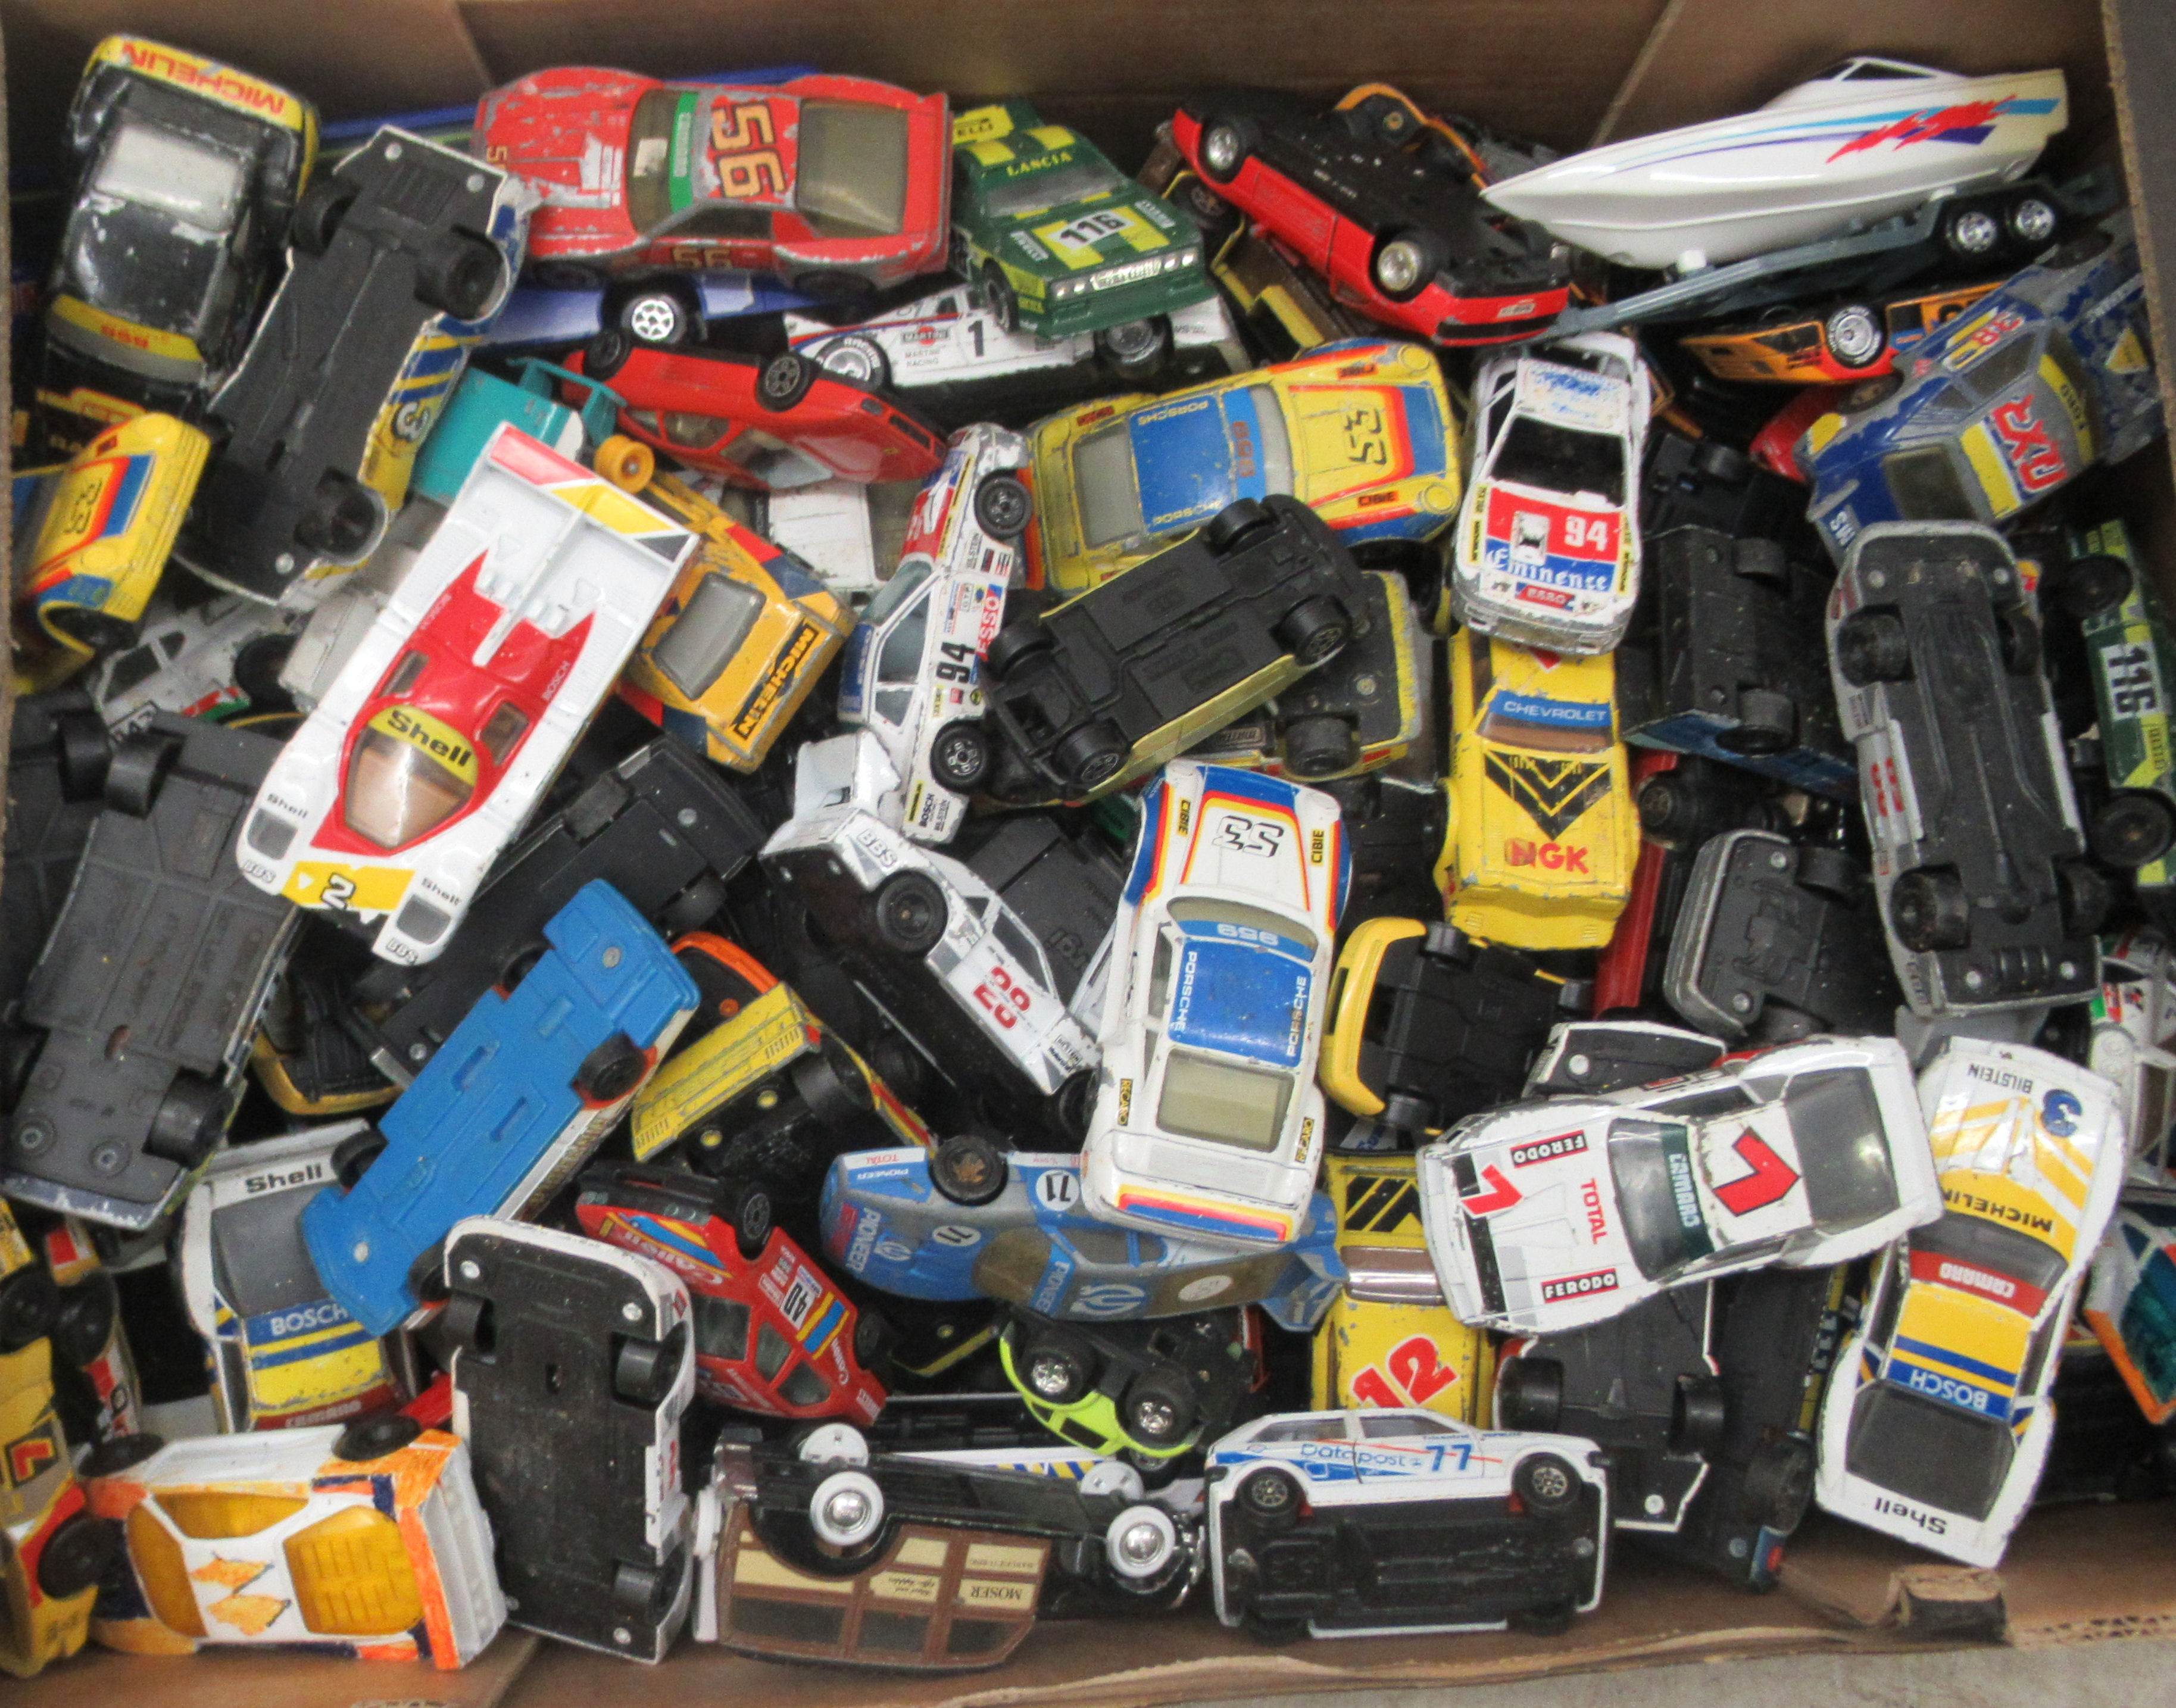 Uncollated diecast model vehicles: to include sports cars, emergency services and convertibles